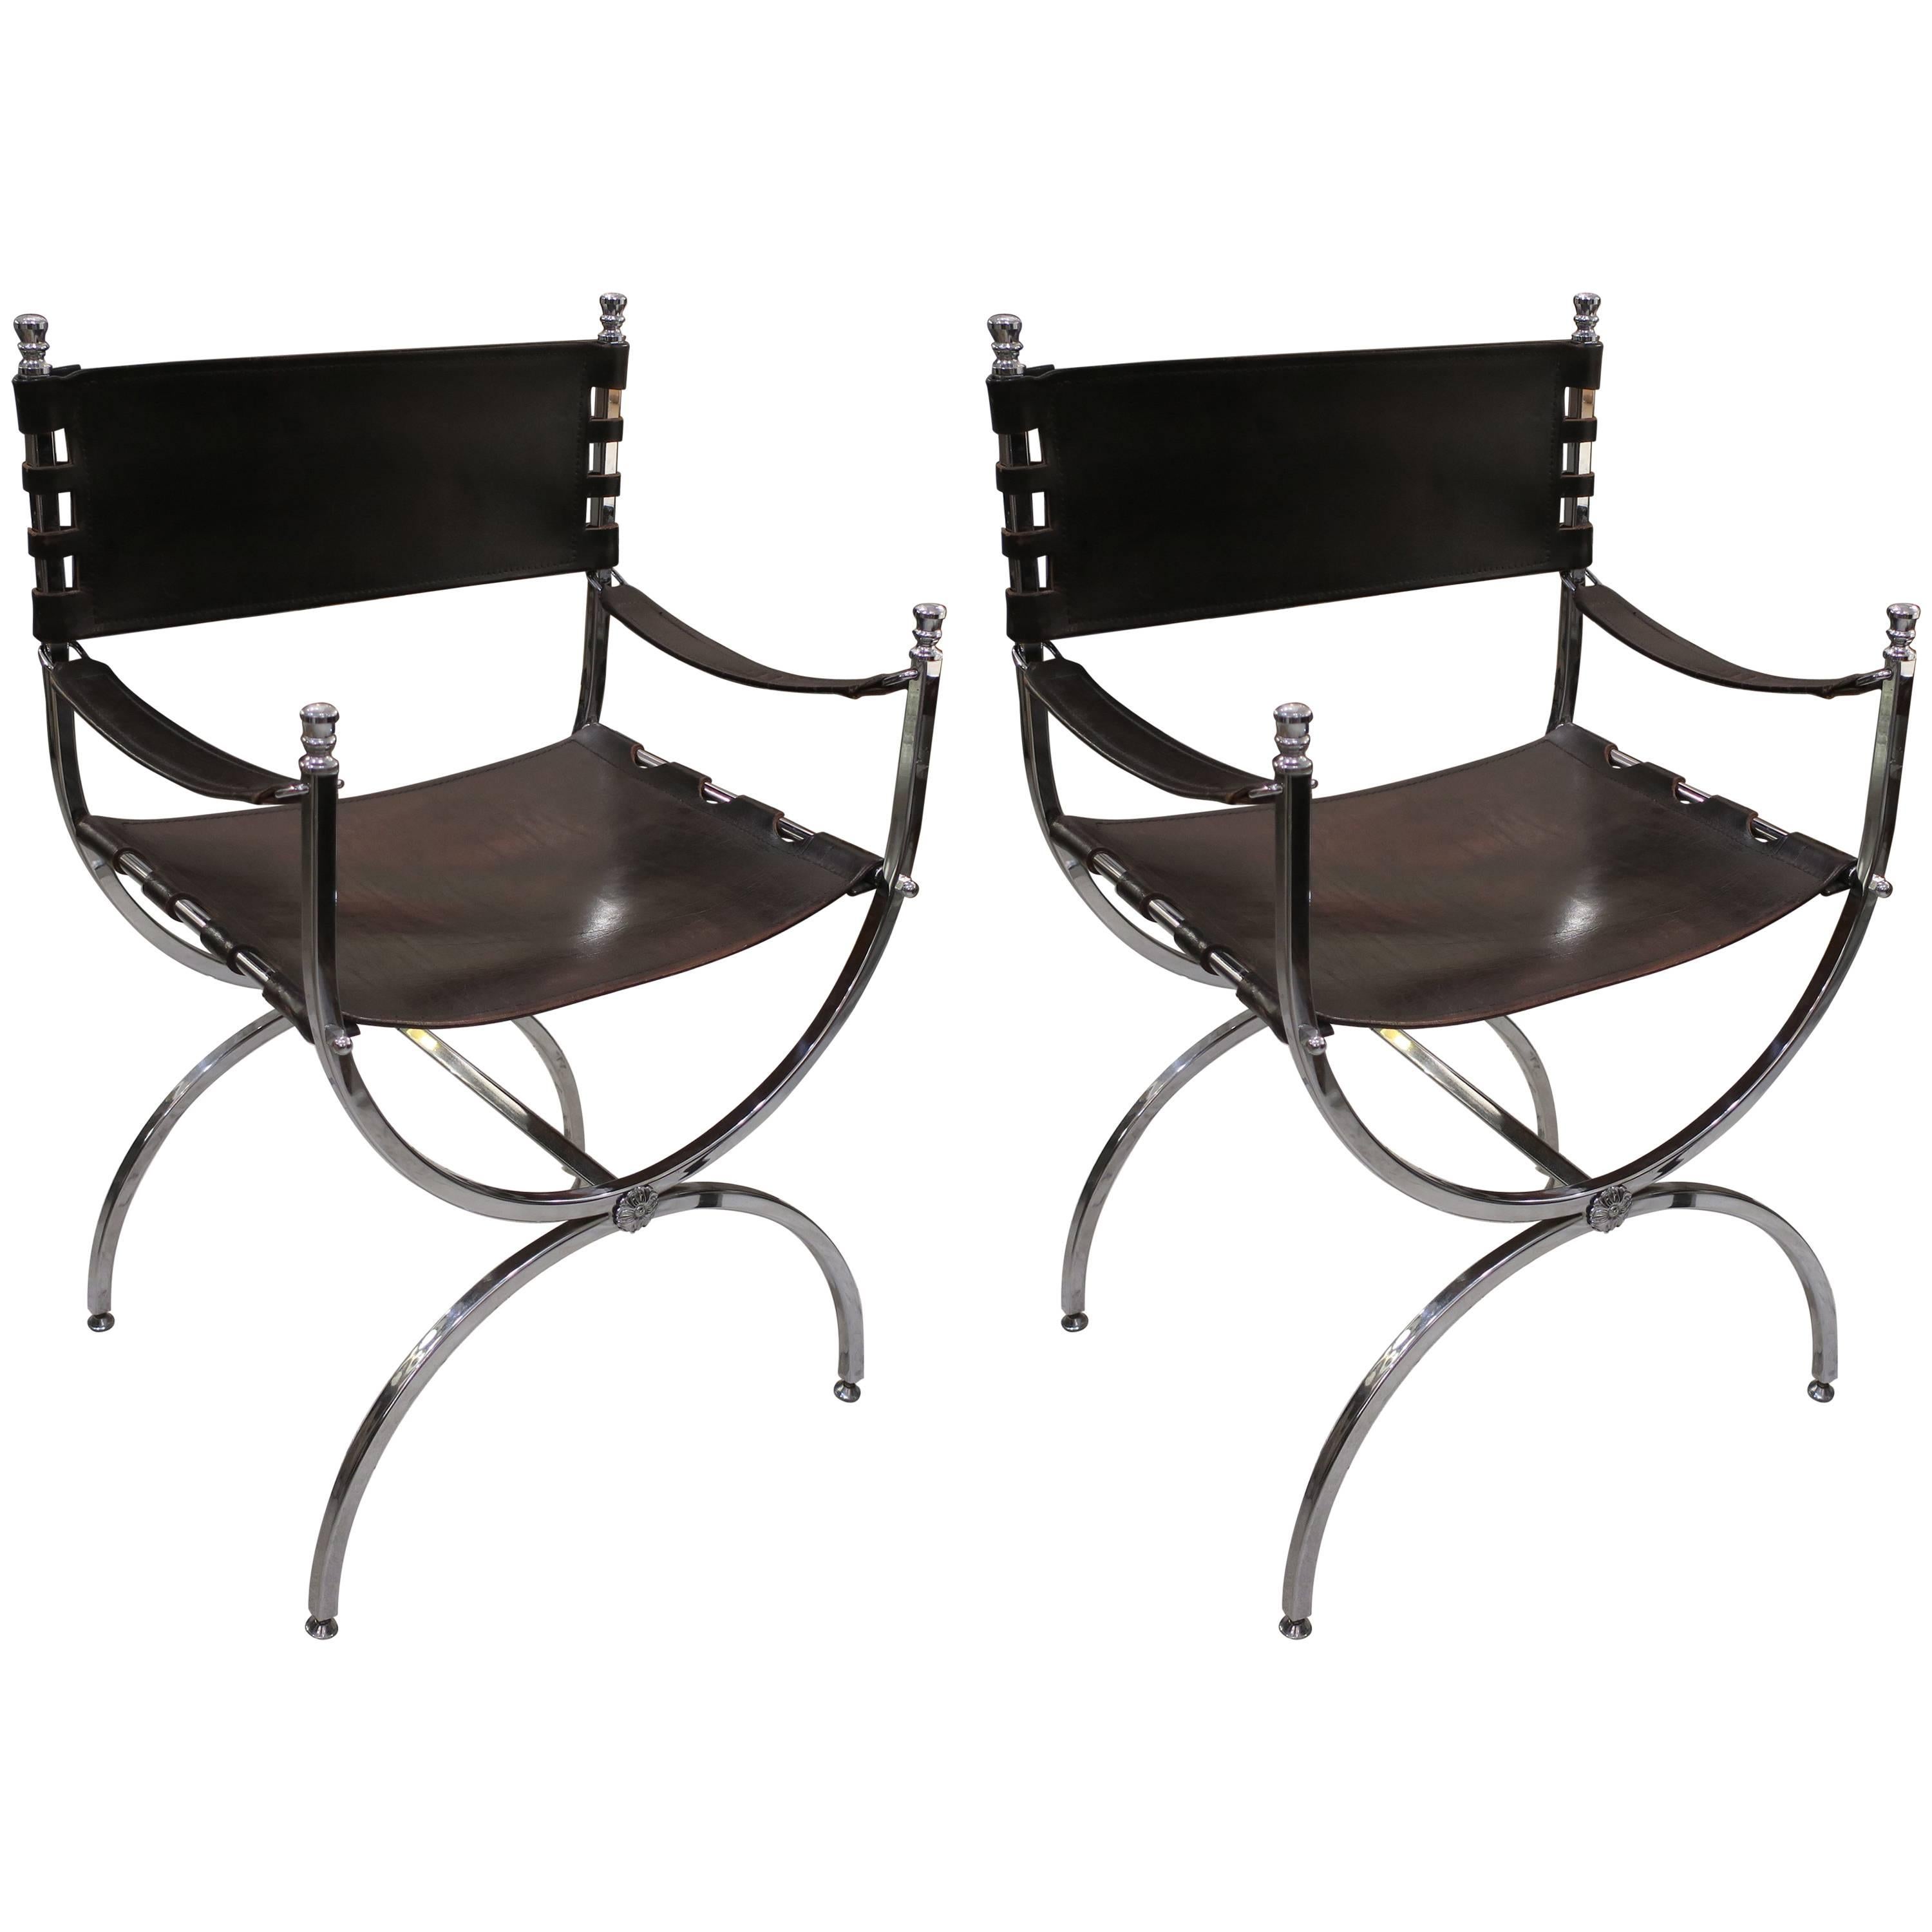 Pair of Chrome and Leather Directors Chairs Attributed to Maison Jansen